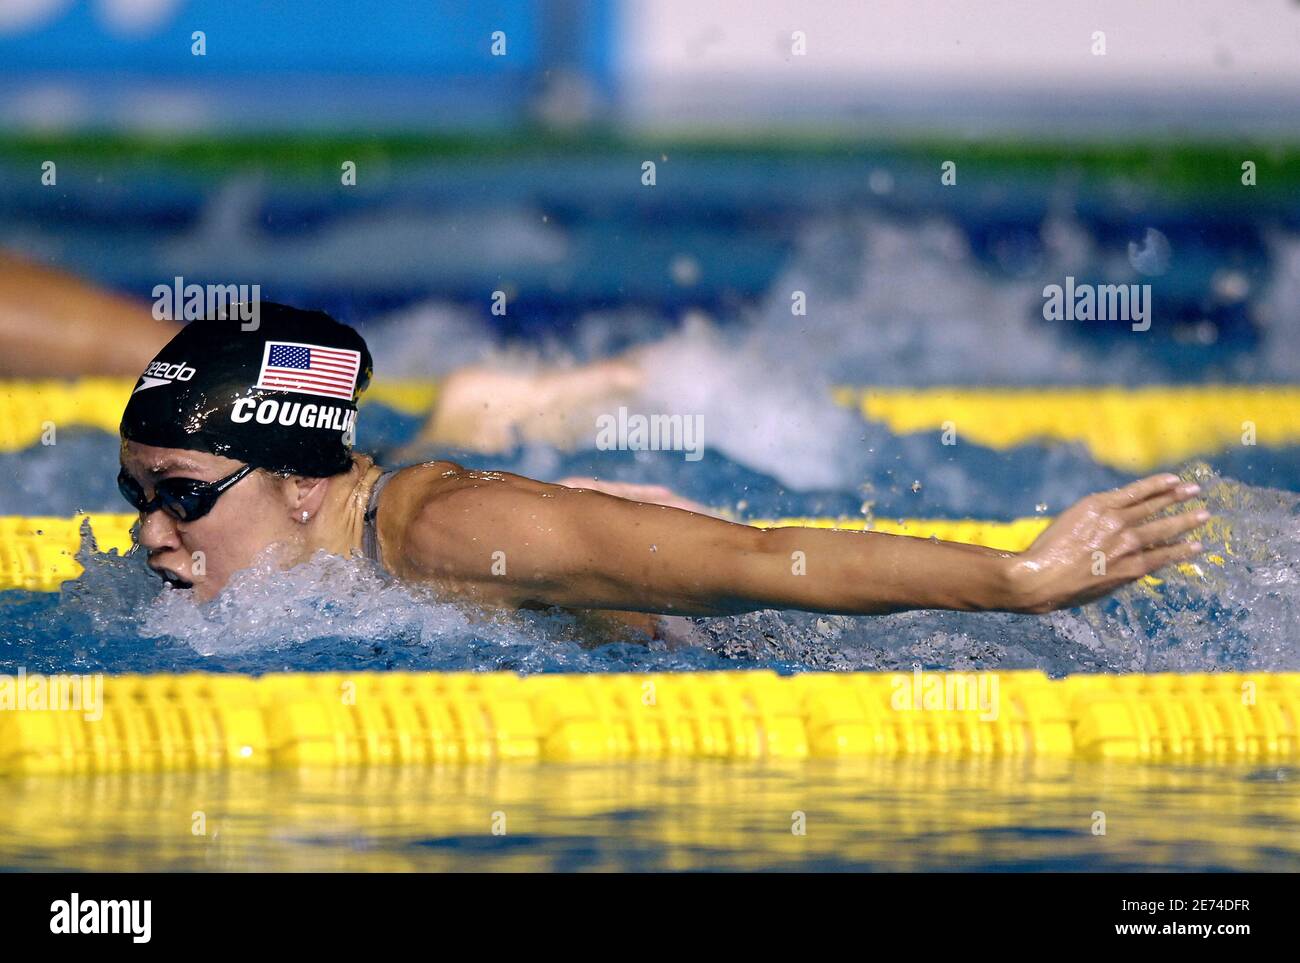 USA's Natalie Coughlin competes on women's 100 meters butterfly semi final during the 12th FINA World Championships, at the Rod Laver Arena, in Melbourne, Australia, on March 25, 2007. Photo by Nicolas Gouhier/Cameleon/ABACAPRESS.COM Stock Photo